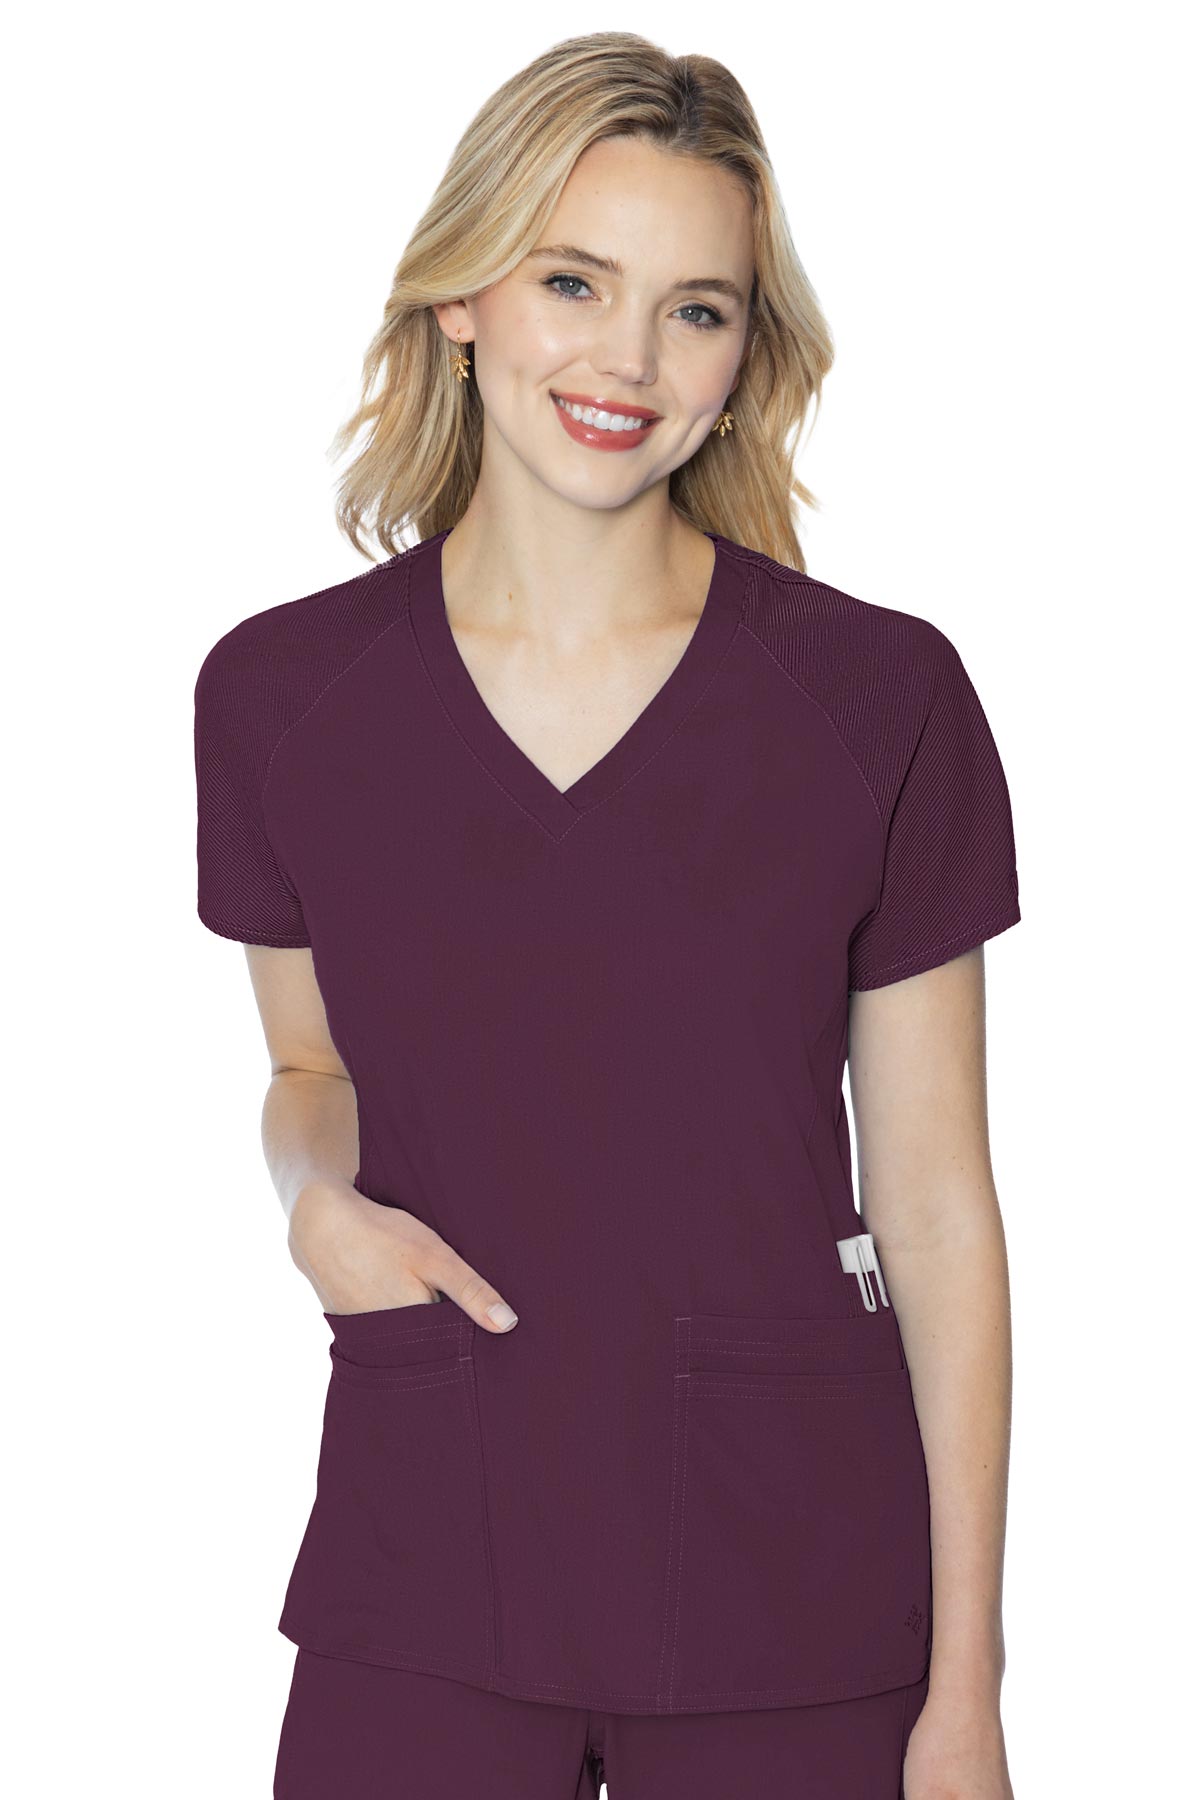 Med Couture Scrub Top Touch Raglan Sleeve in wine at Parker's Clothing and Shoes.